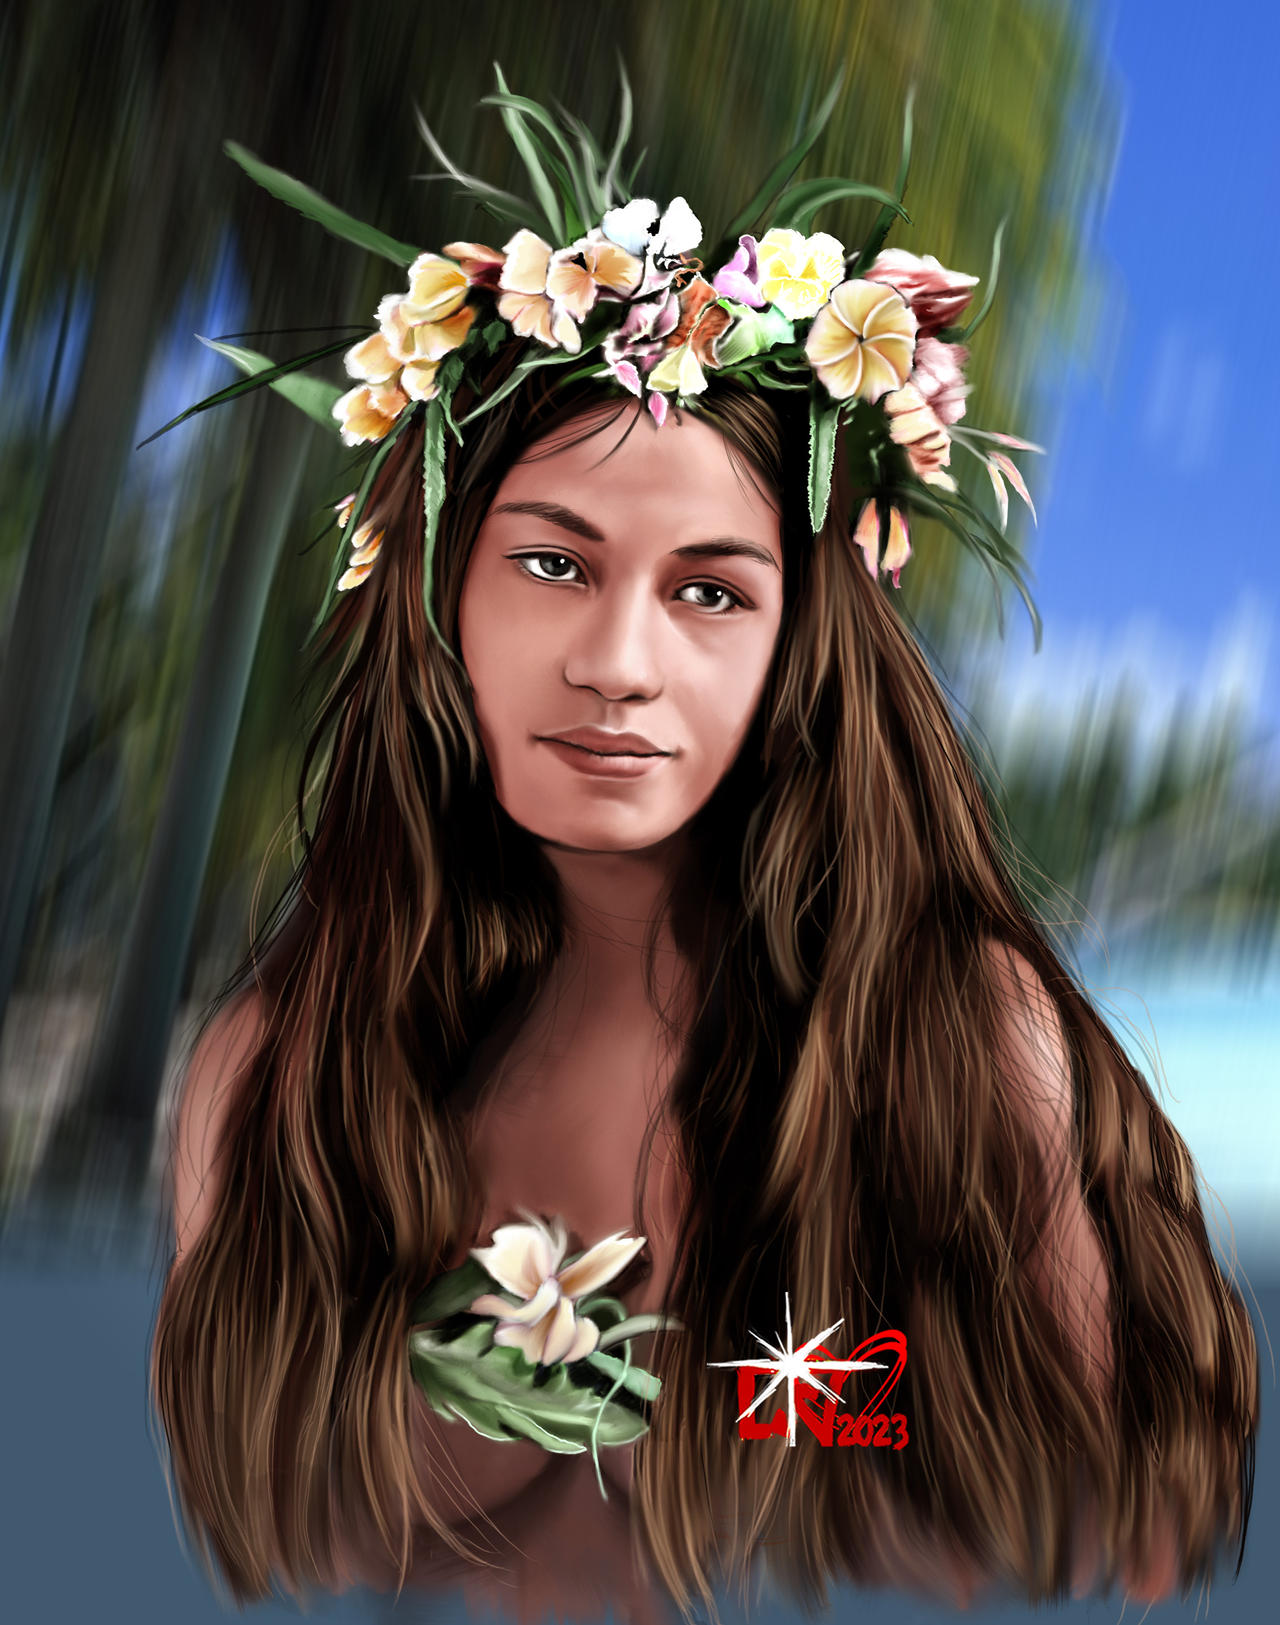 Tahitian vahine - natural beauty by che38 on DeviantArt